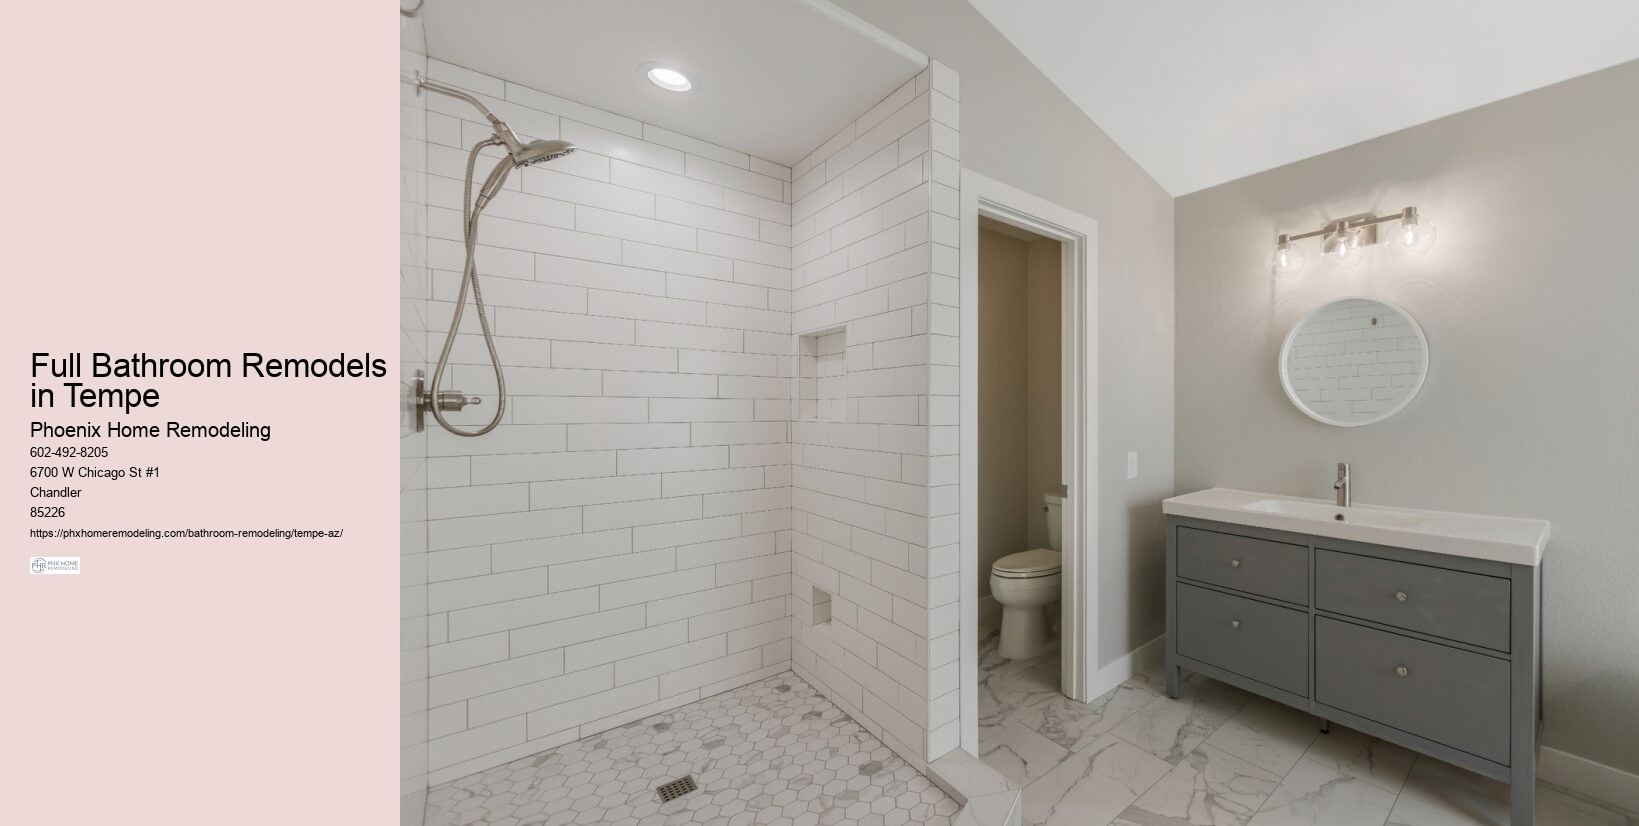 What comes first in bathroom remodeling